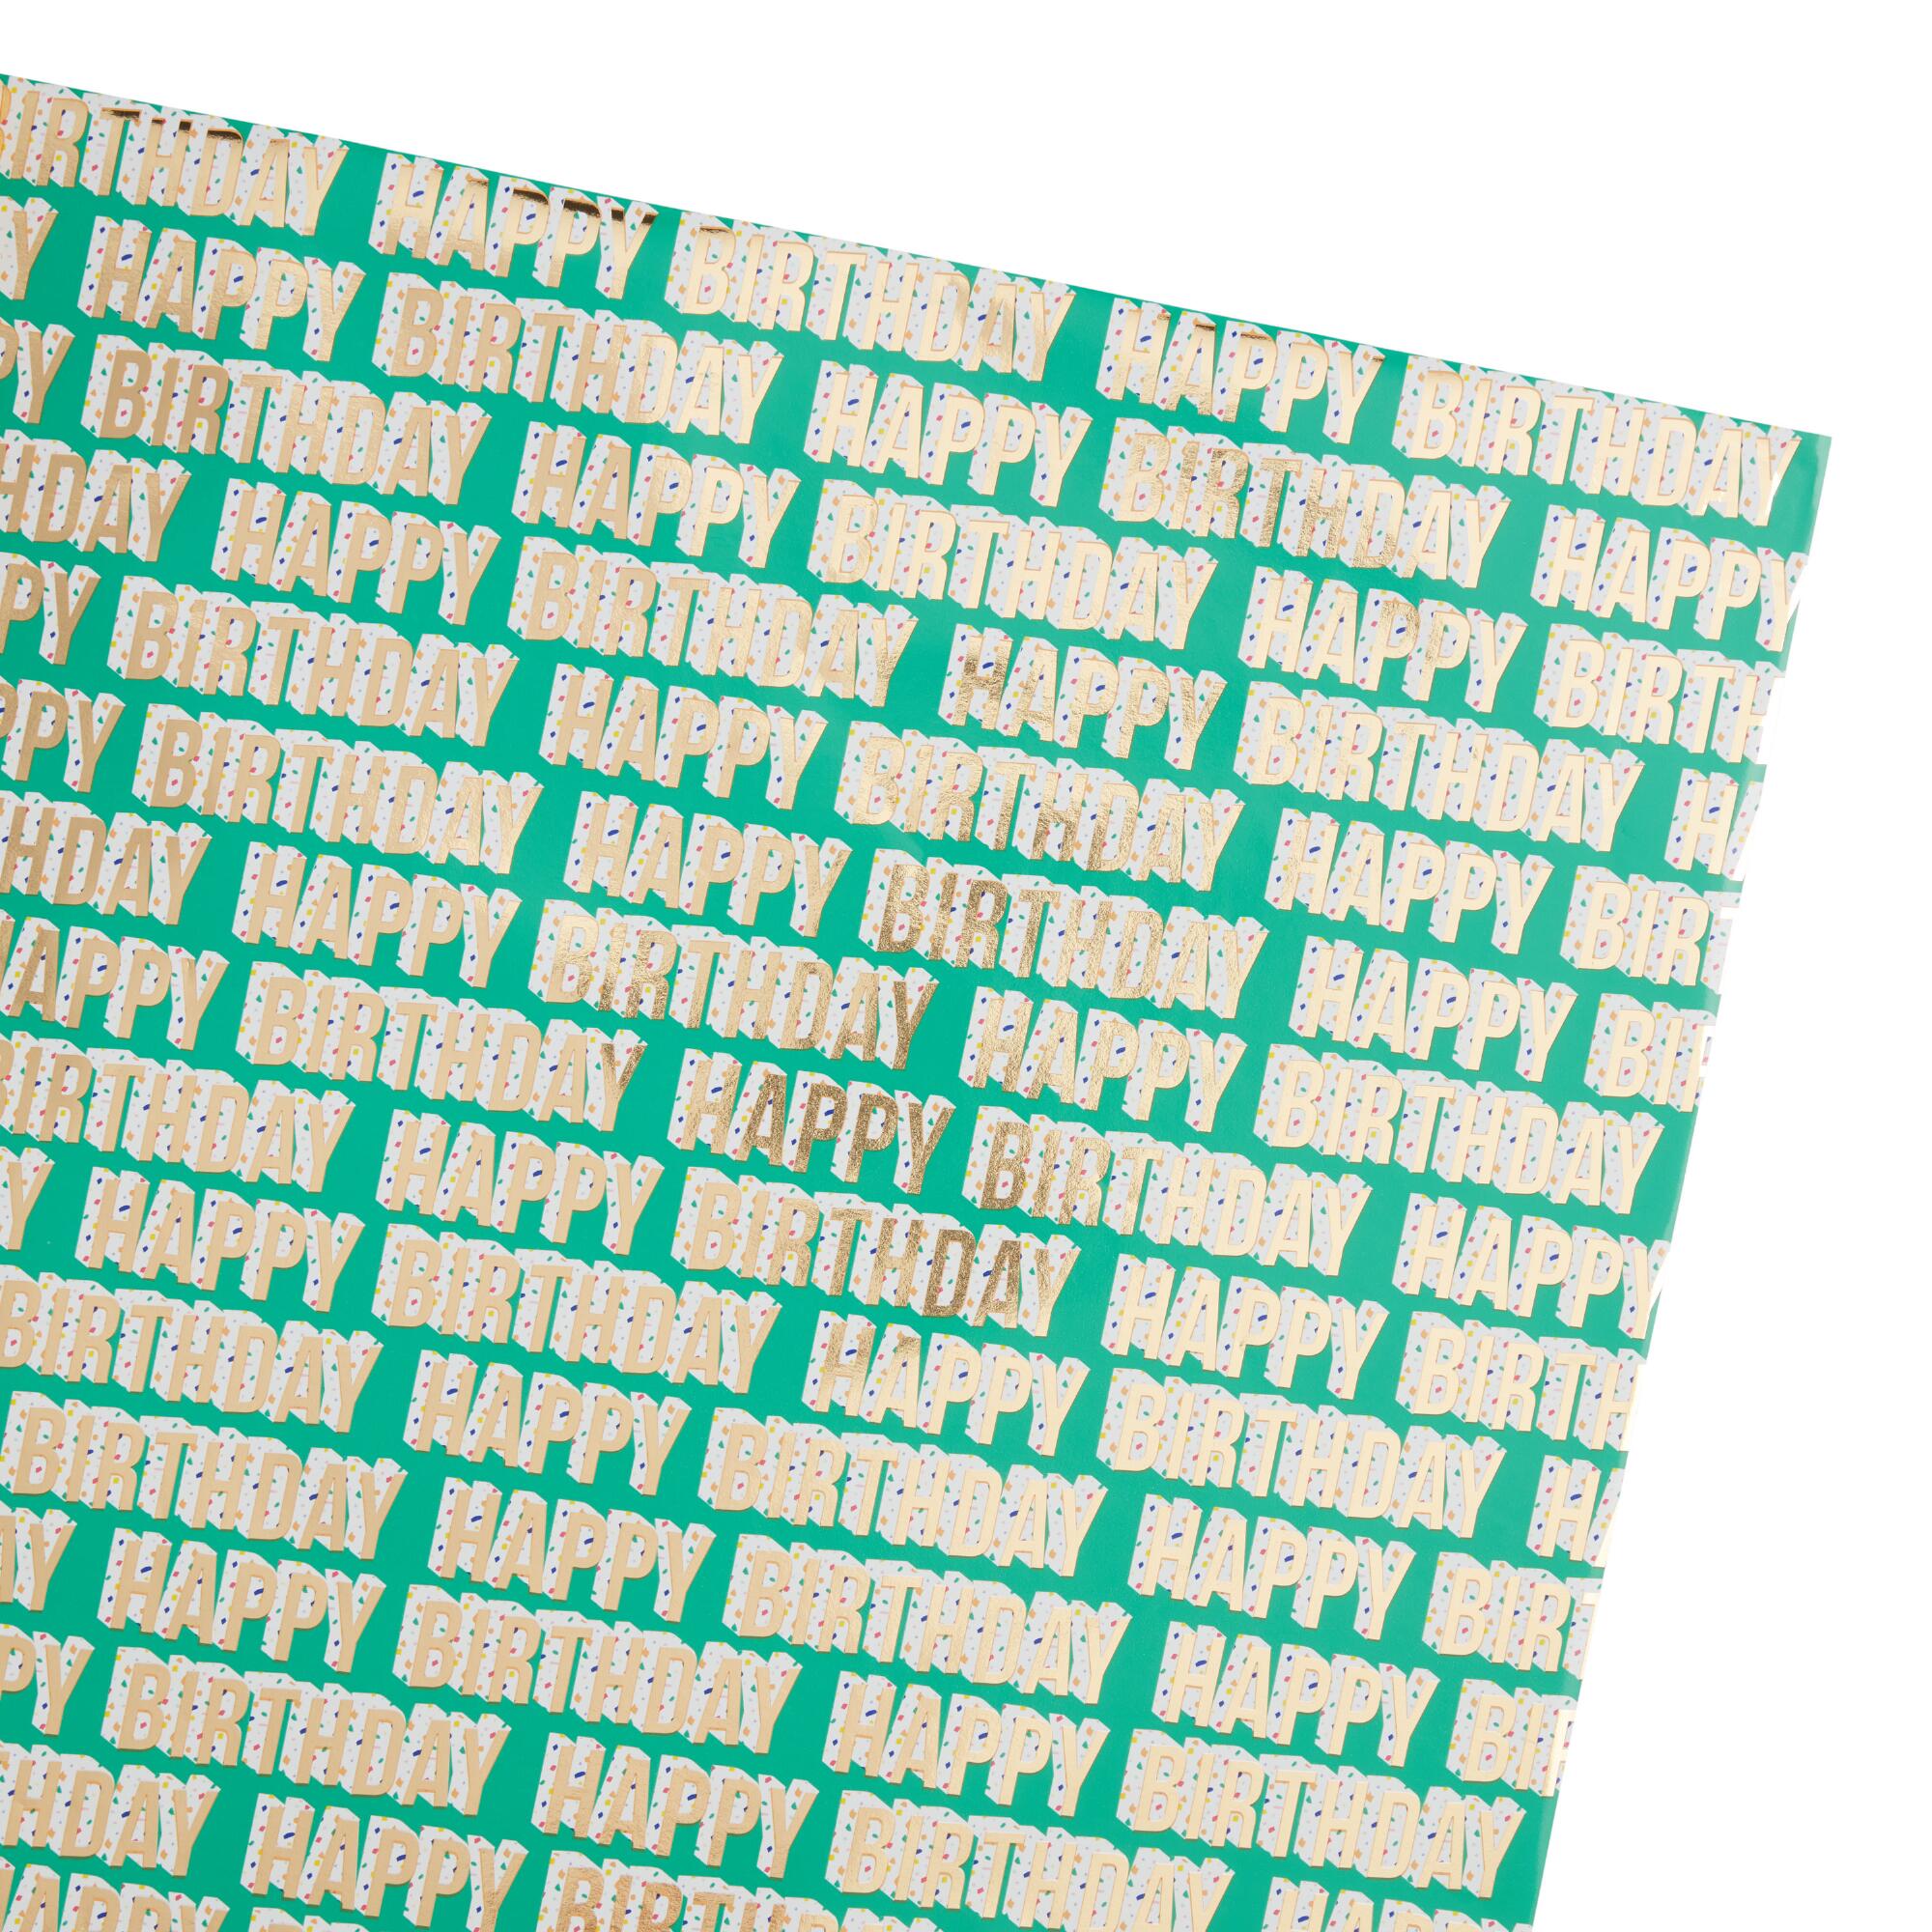 Turquoise and Gold Terrazzo Birthday Wrapping Paper Roll by World Market